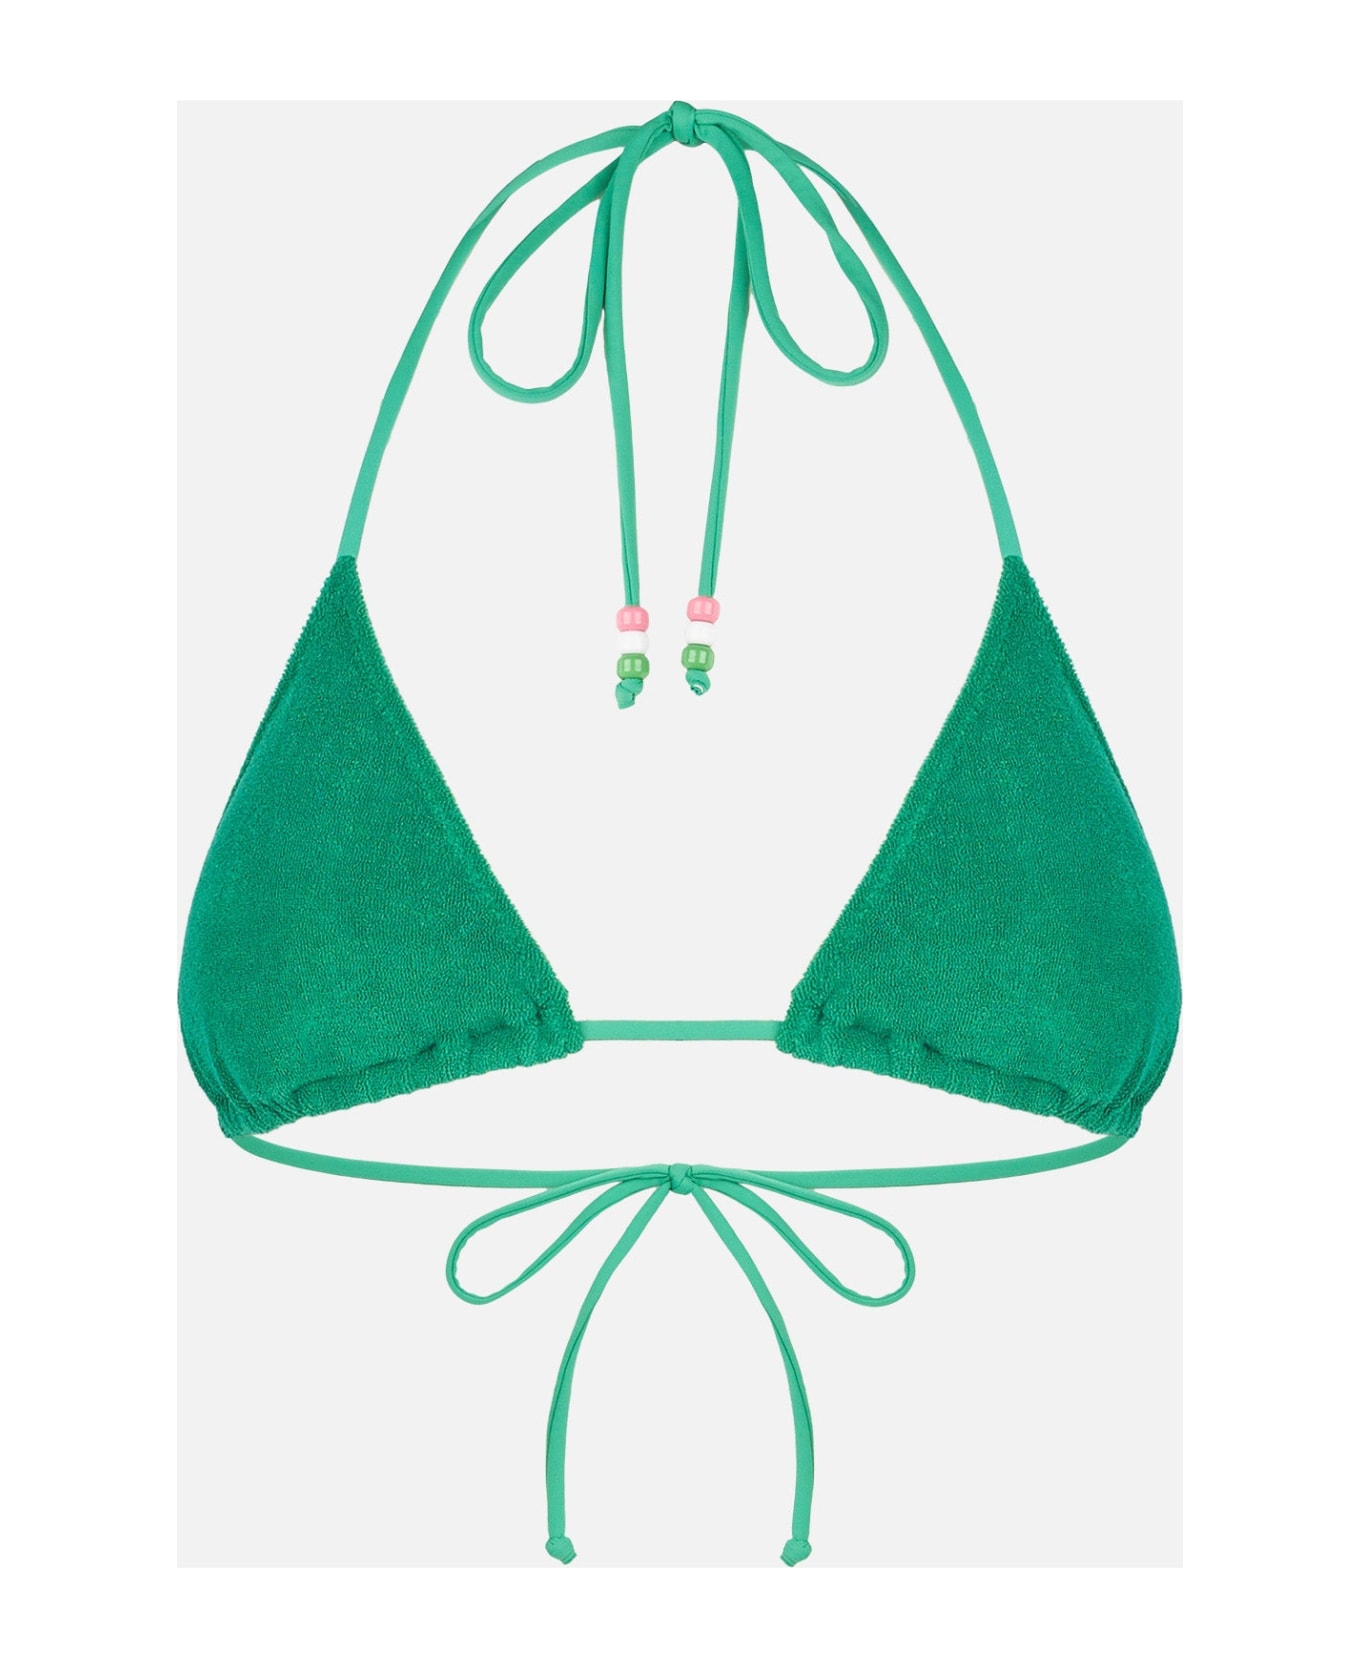 MC2 Saint Barth Woman Green Terry Triangle Top Swimsuit With Charms - GREEN